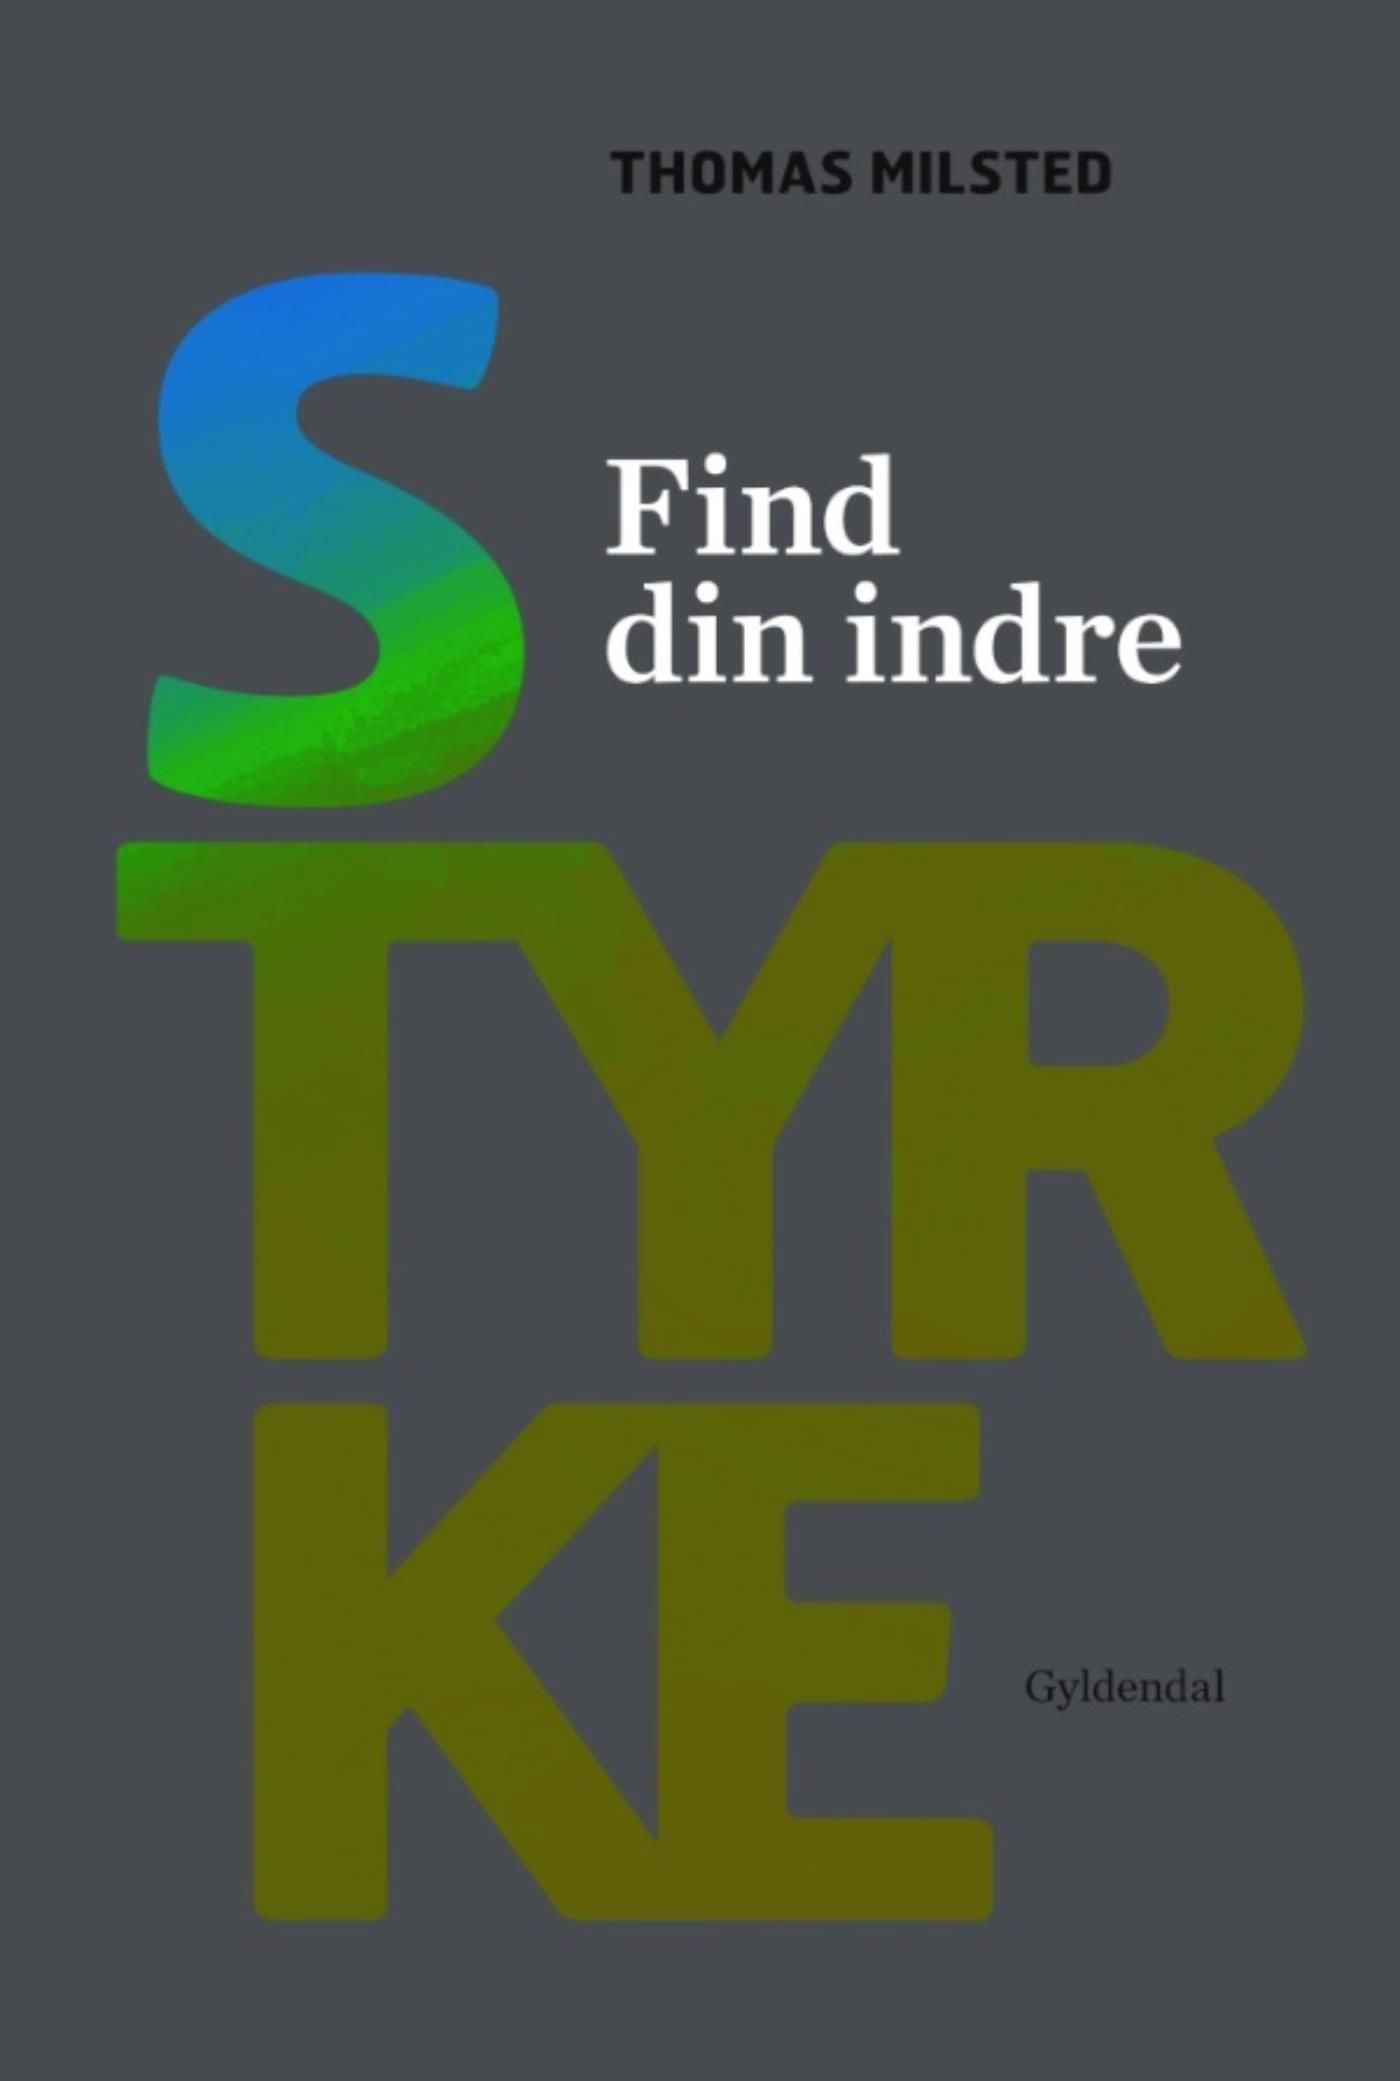 Find din indre styrke, eBook by Anna Bridgwater, Thomas Milsted